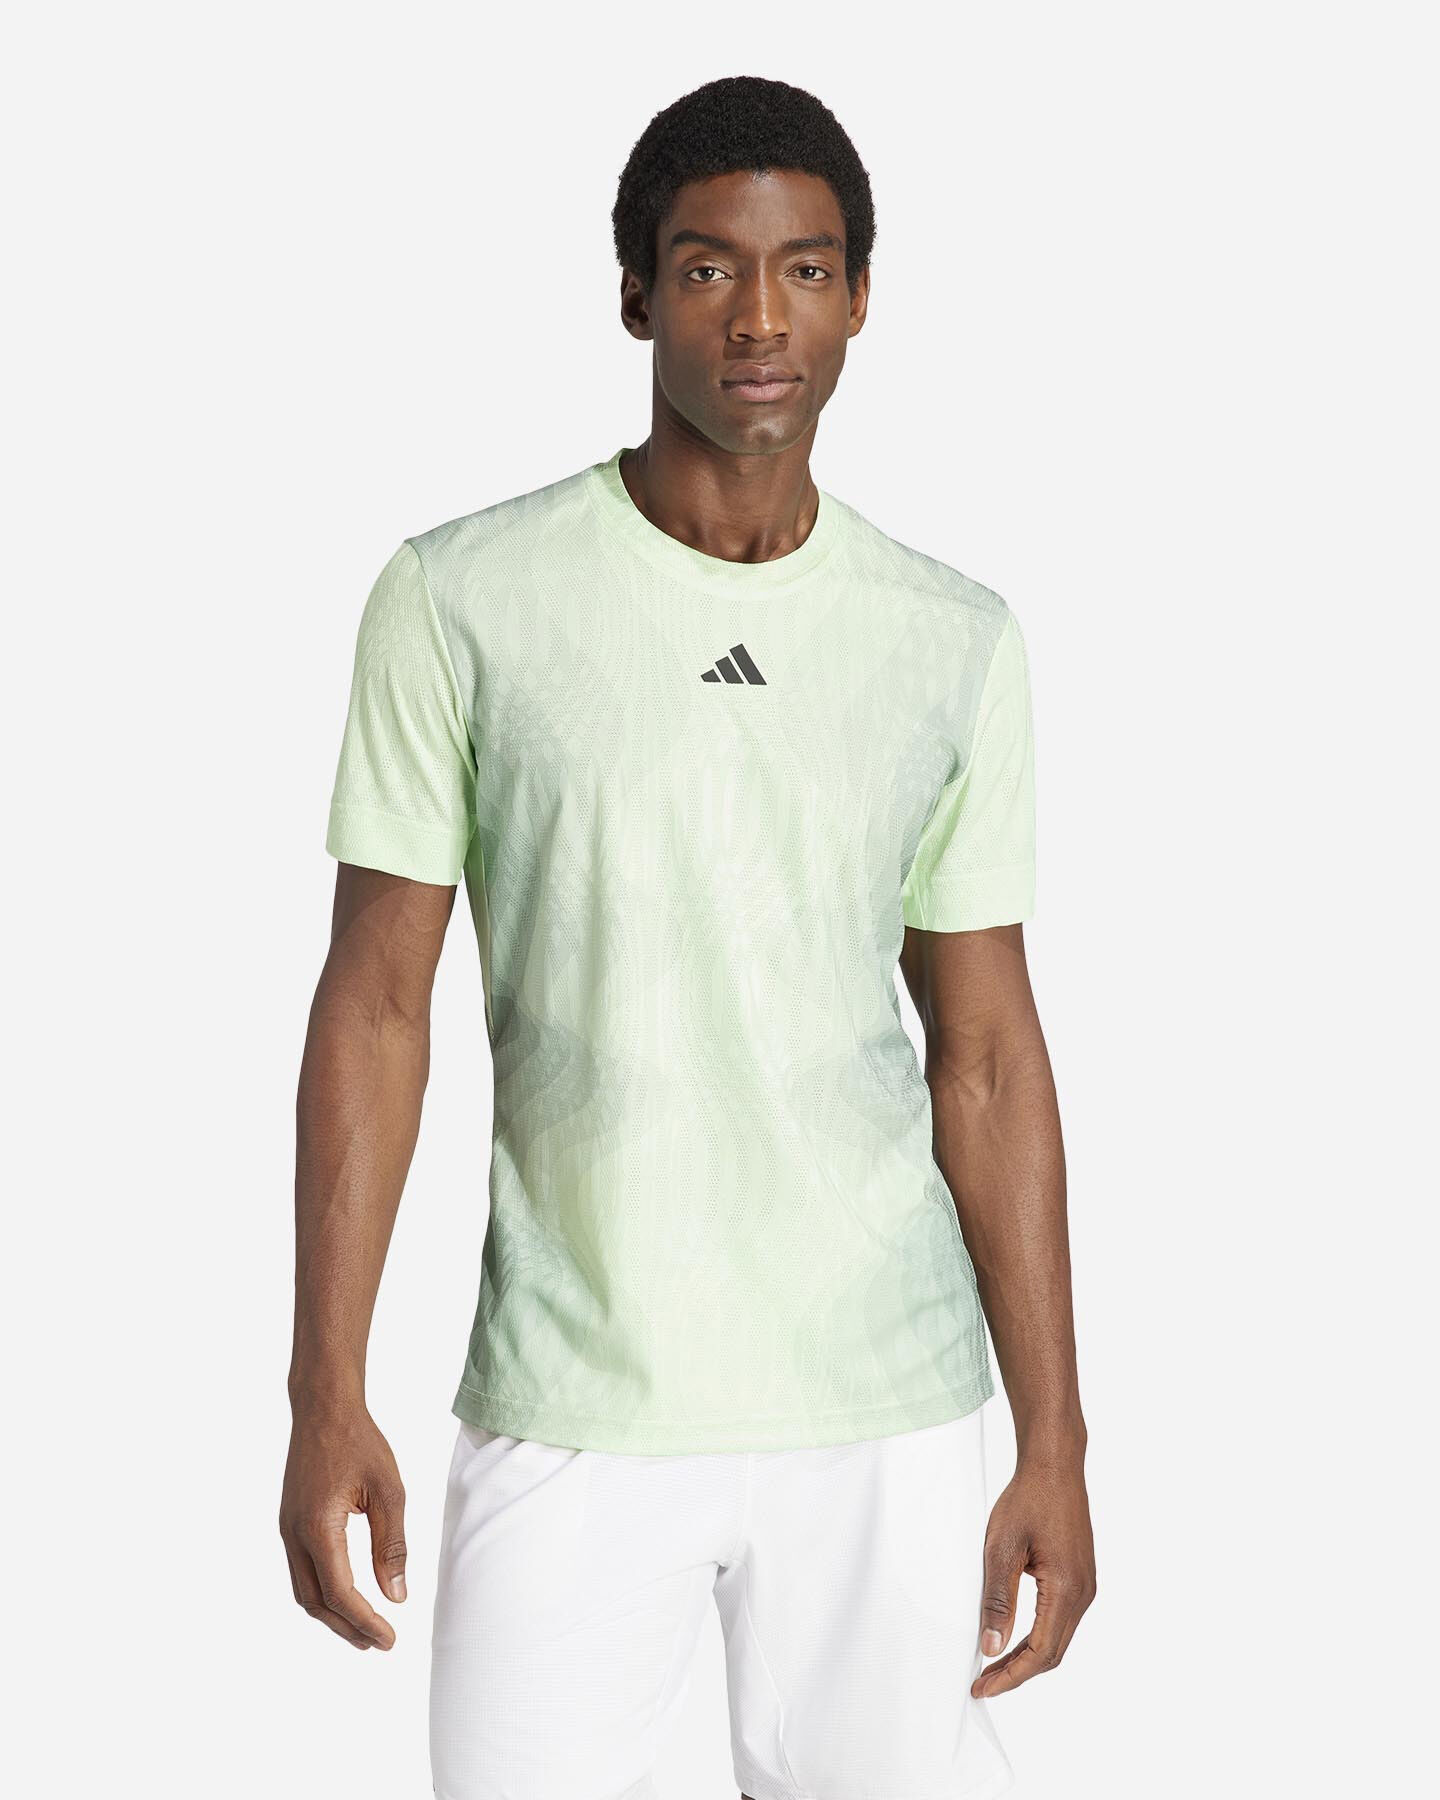  T-Shirt tennis ADIDAS AO23 AUGER M S5690179|UNI|S scatto 1